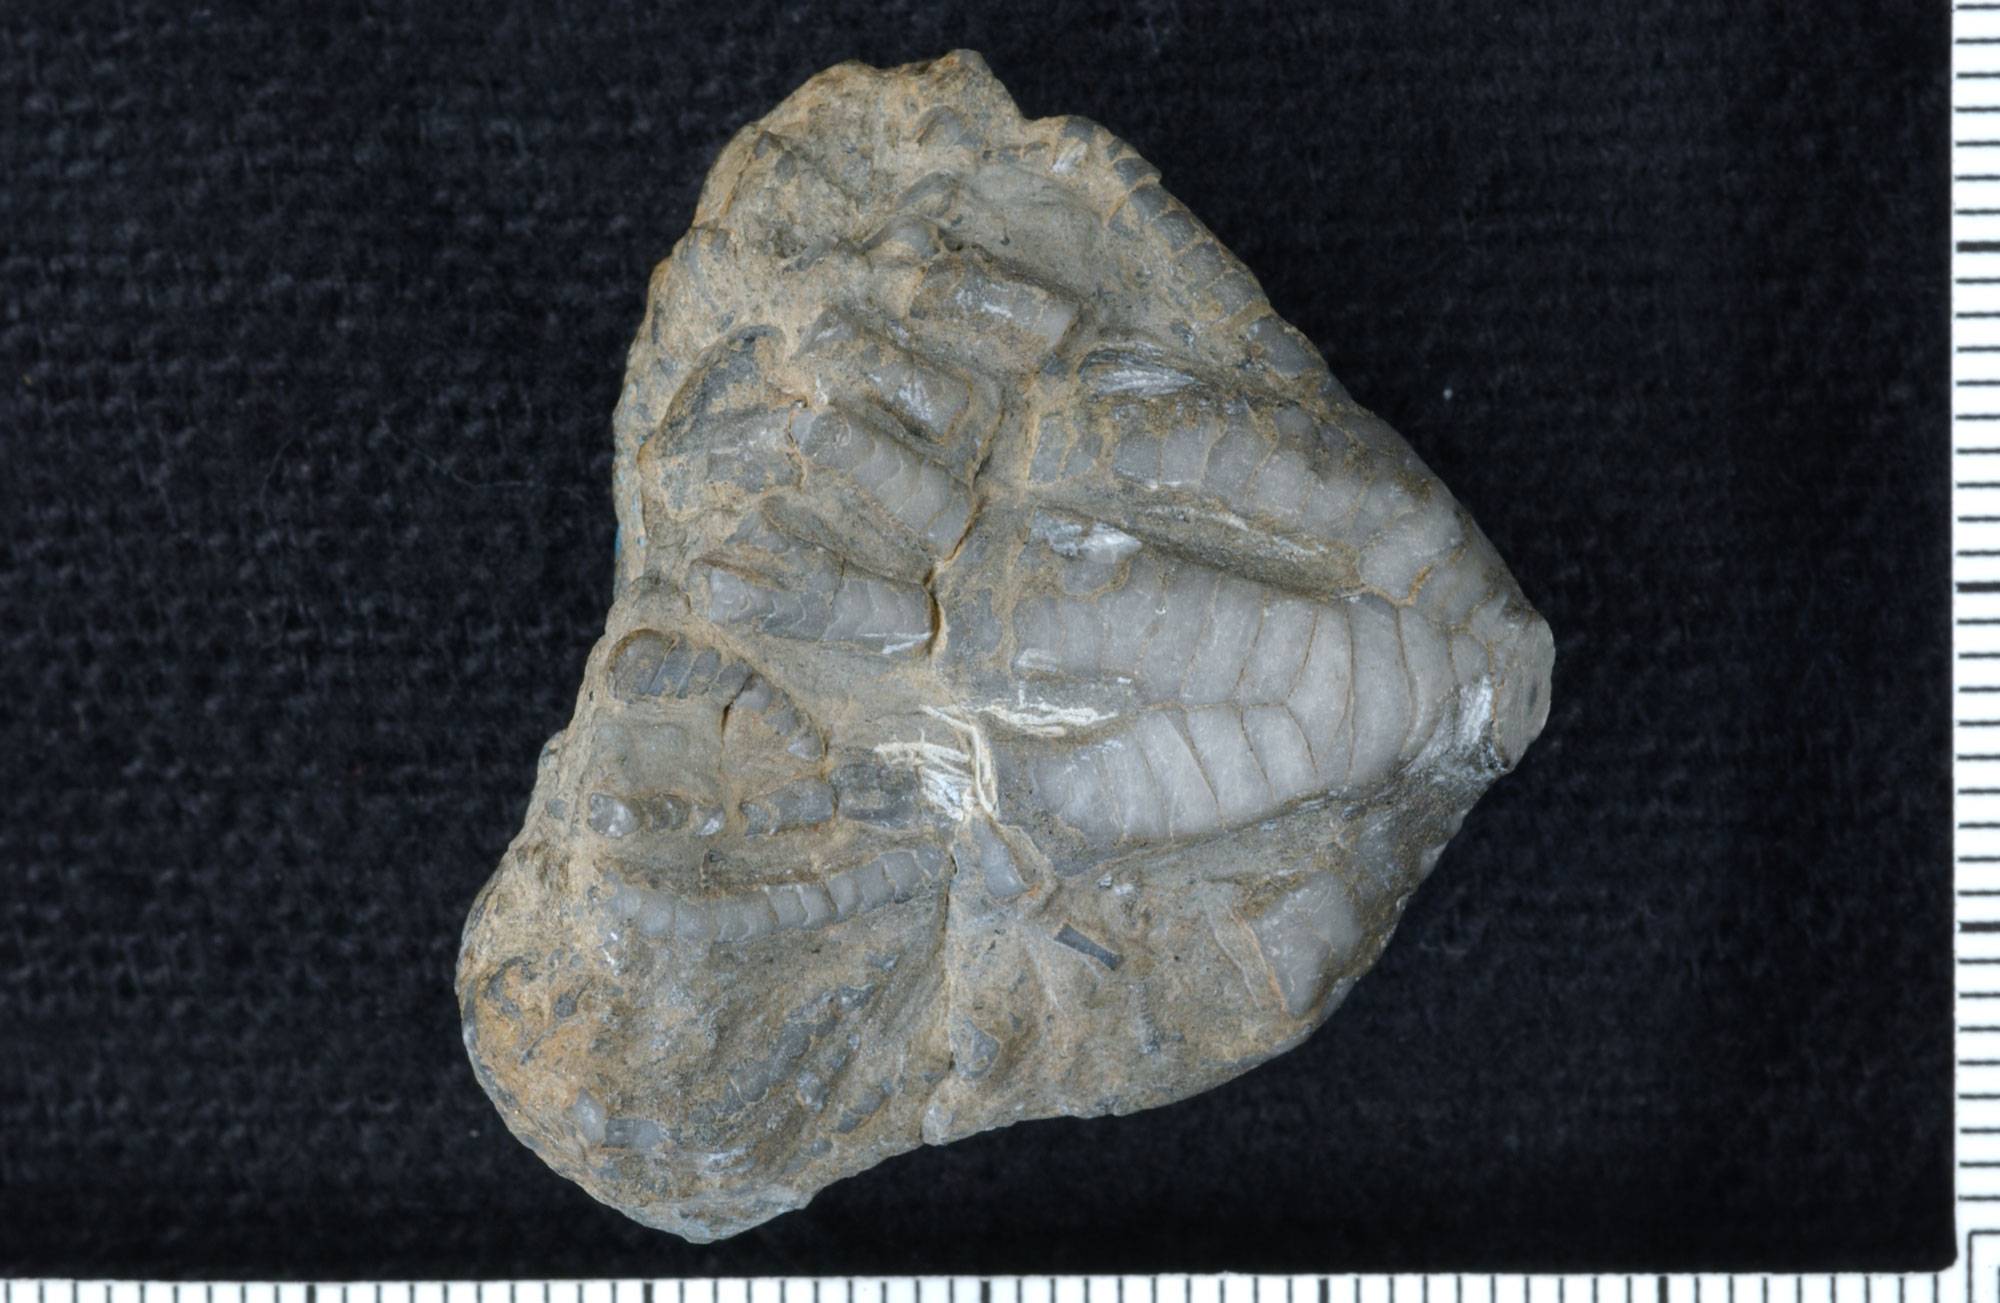 Photograph of a crinoid from the Devonian Three Forks Formation of Idaho. The photo shows the arms of a crinoid. The crinoid arms are made up of stacked segments, are whitish-gray in color, and bifurcating. The ends of the arms do not appear to be preserved. The length of the specimen is about 3 centimeters.